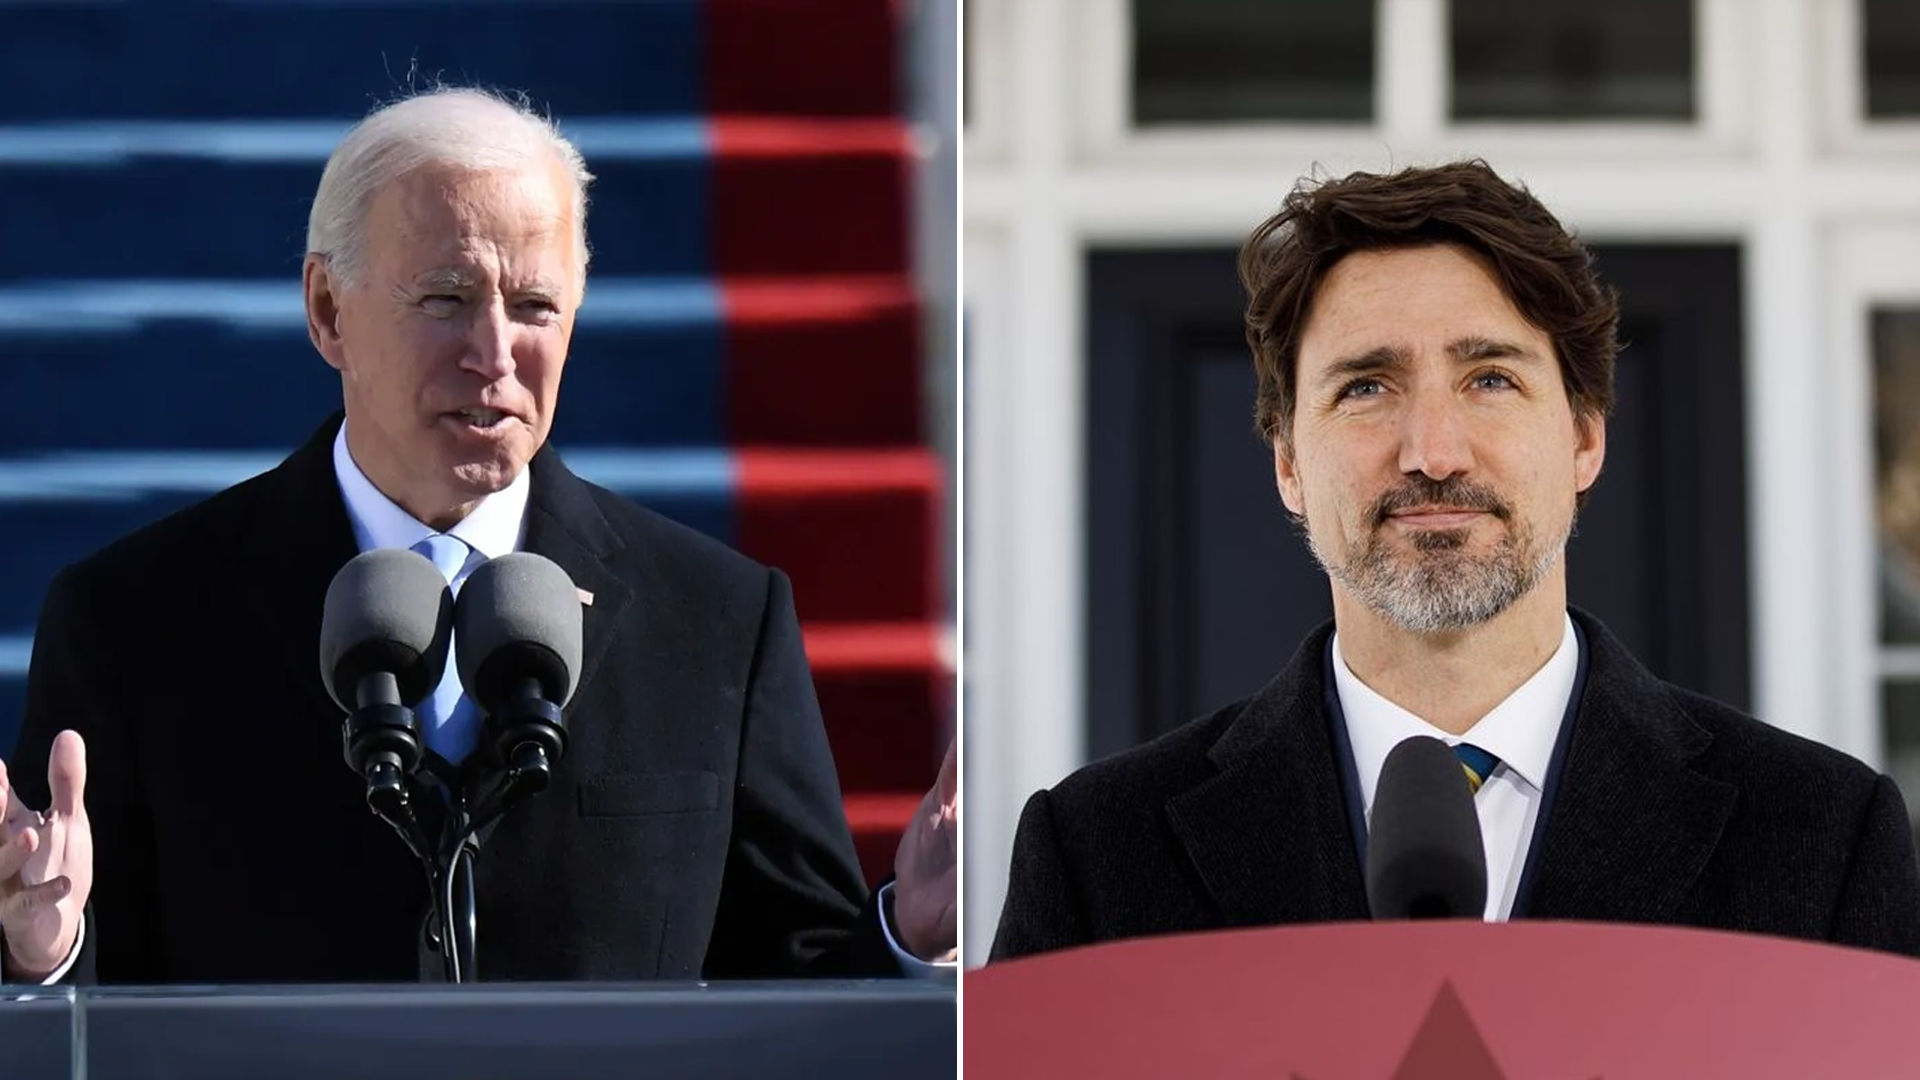 Joe Biden and Justin Trudeau to interact virtually in their first bilateral meet today